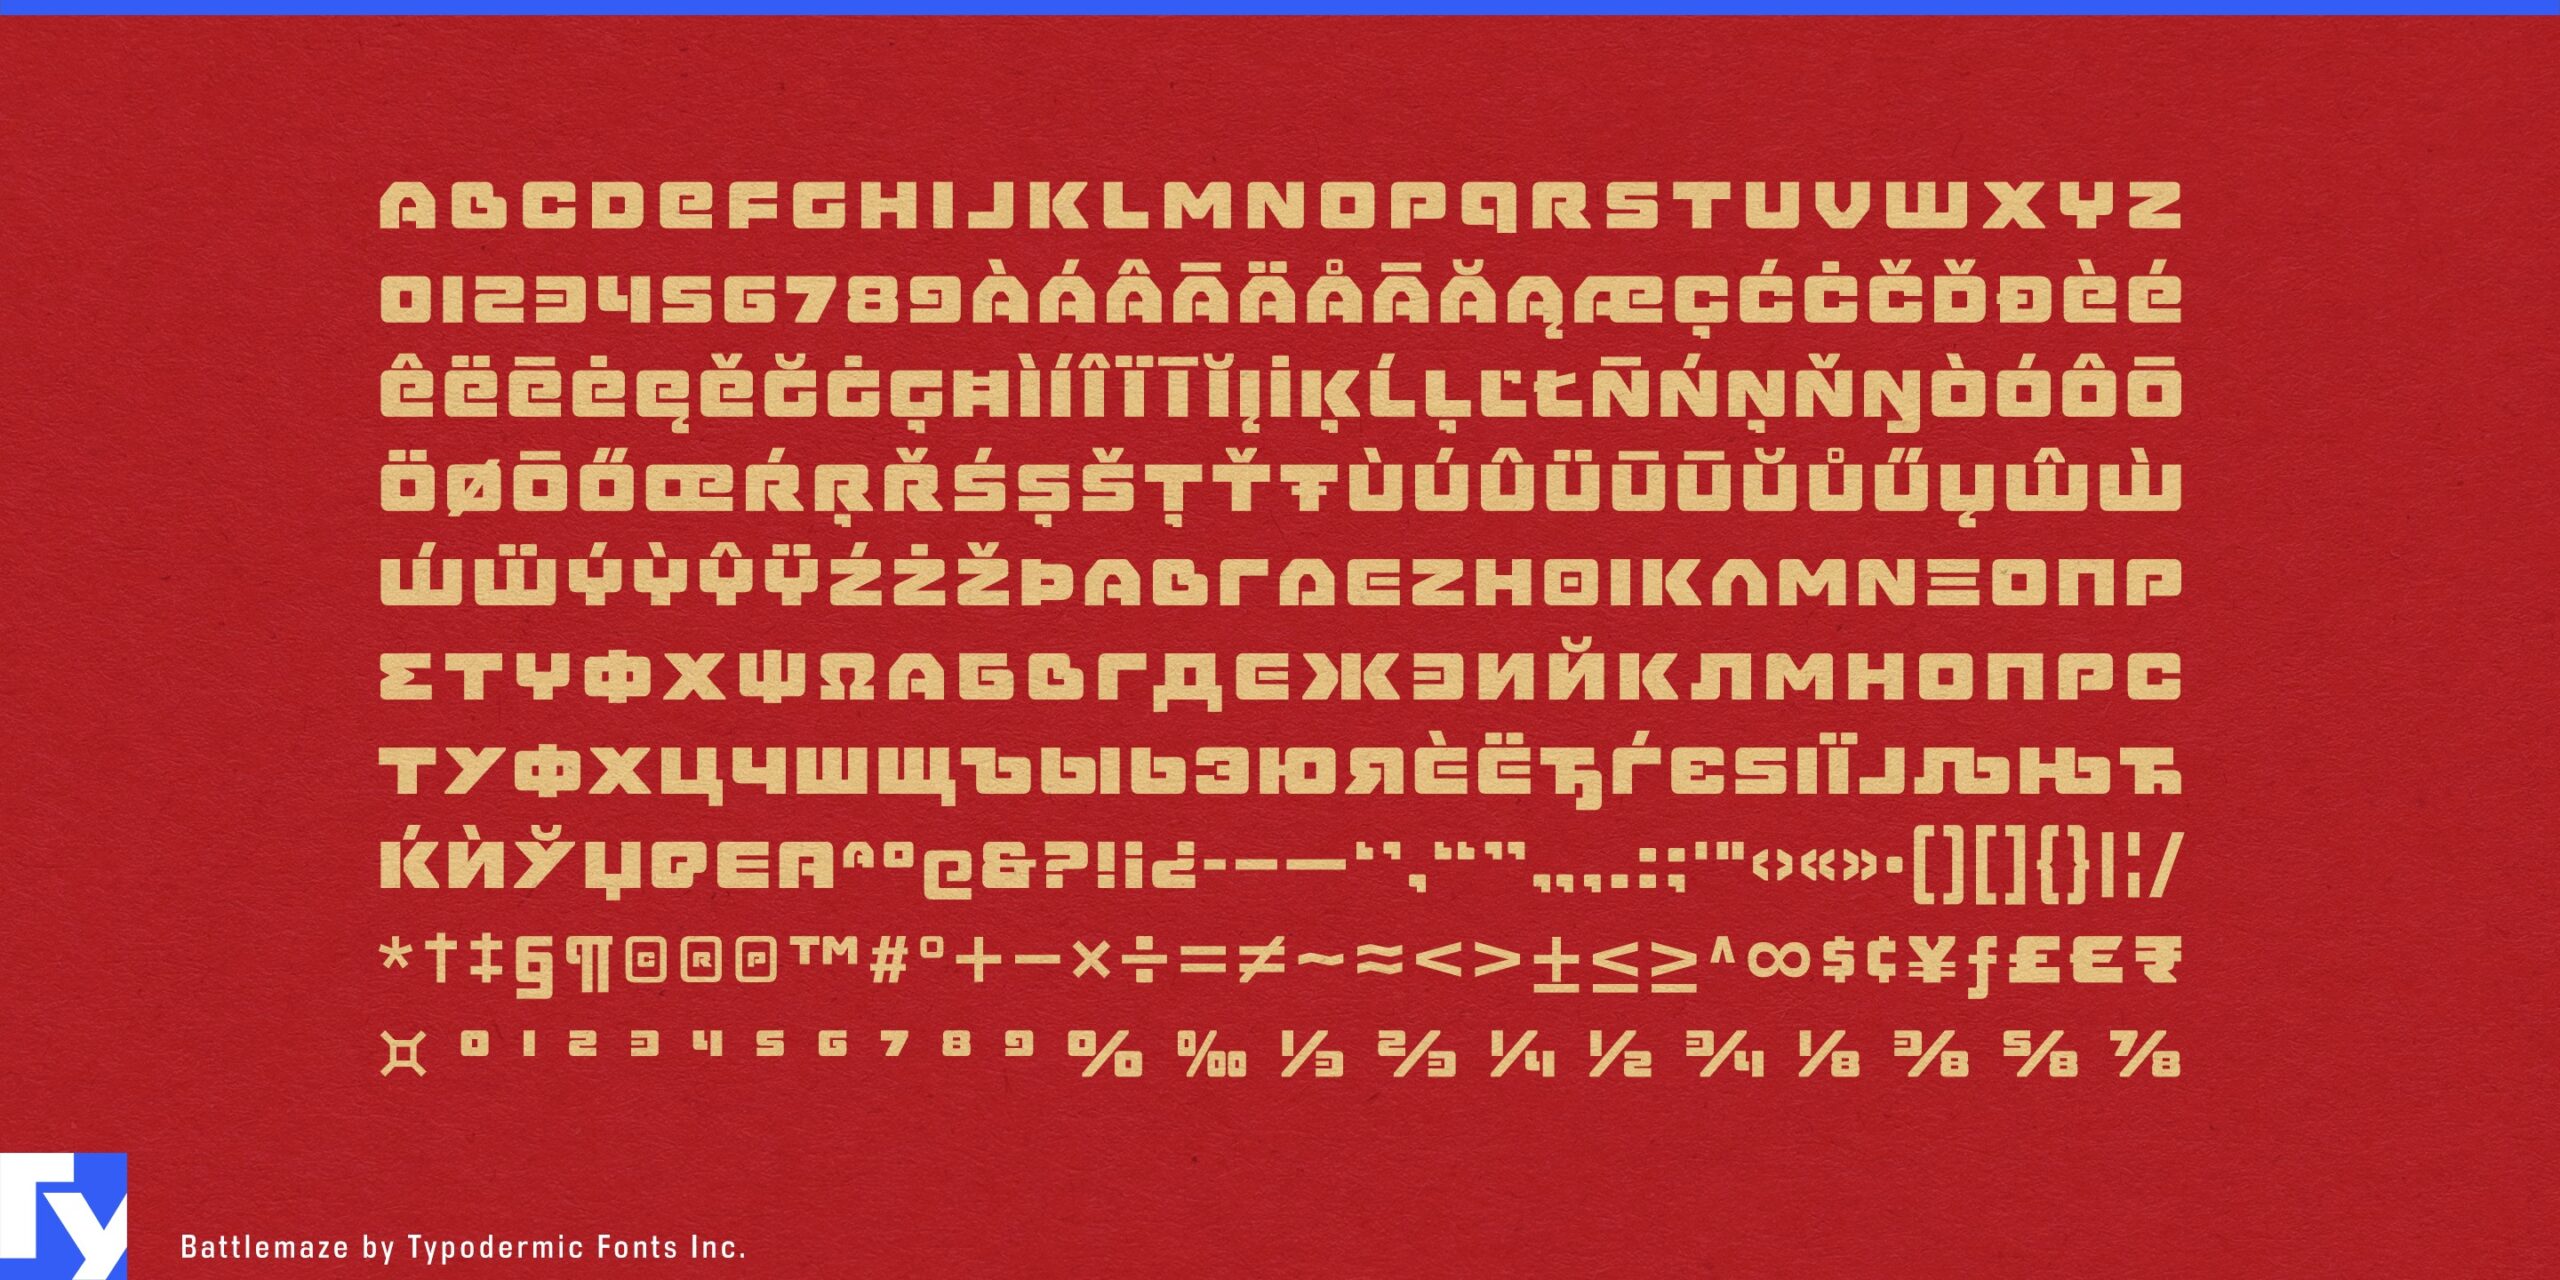 Battlemaze Typeface: Where Japanese Industrial Design Meets the Future